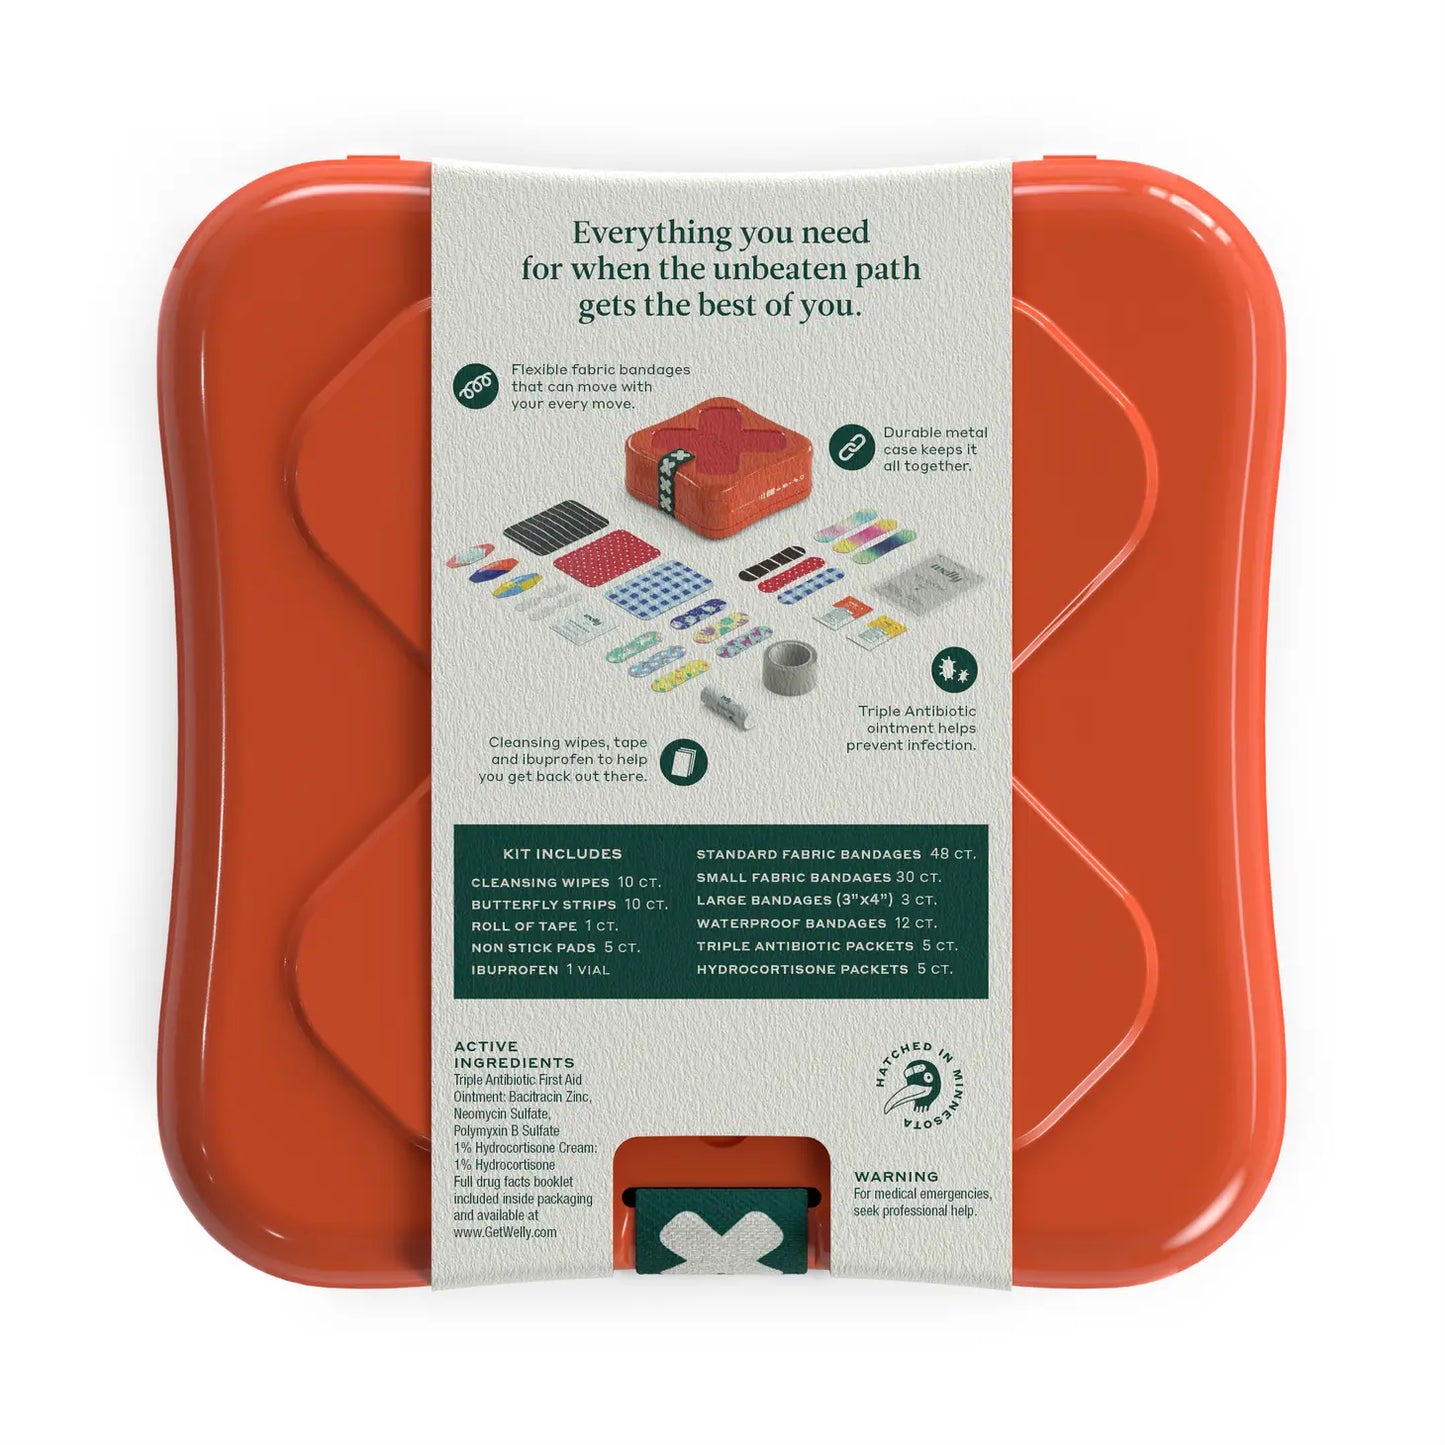 Welly First Aid Kit (103 ct.)